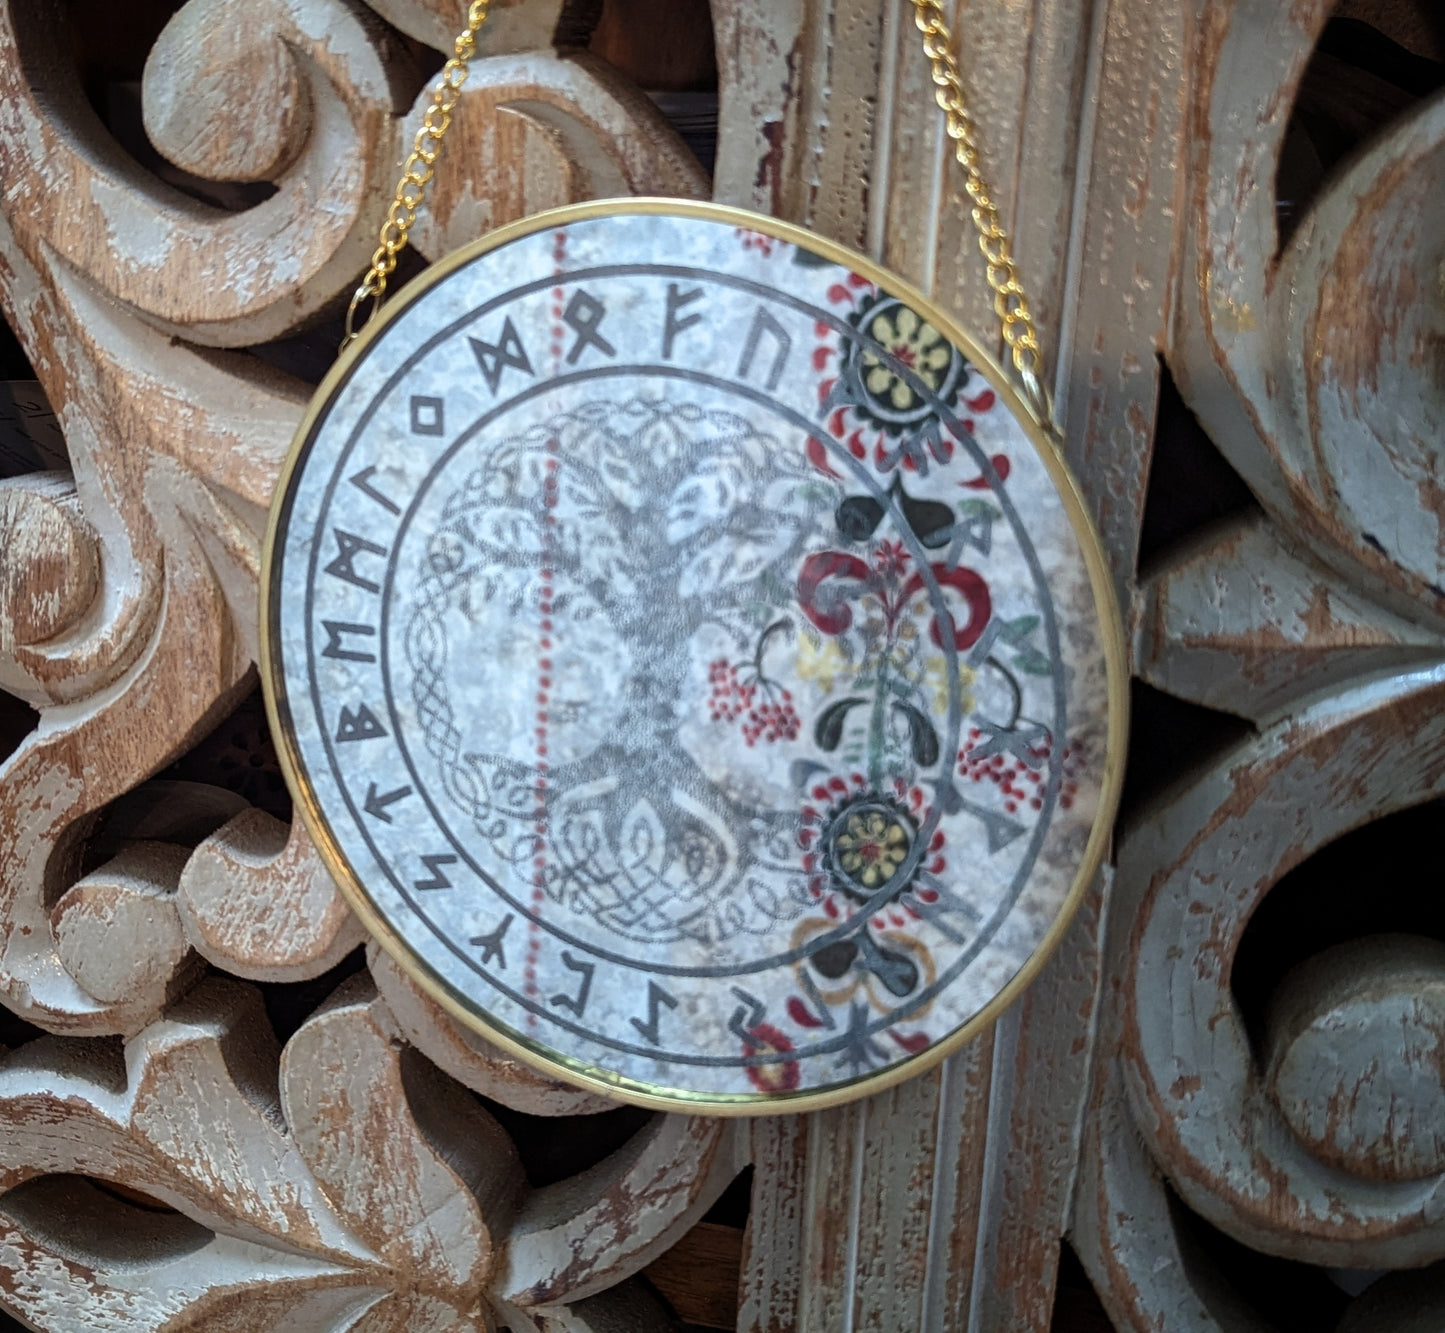 Rune and Yggdrasil Engraved Mirror on Gold Chain